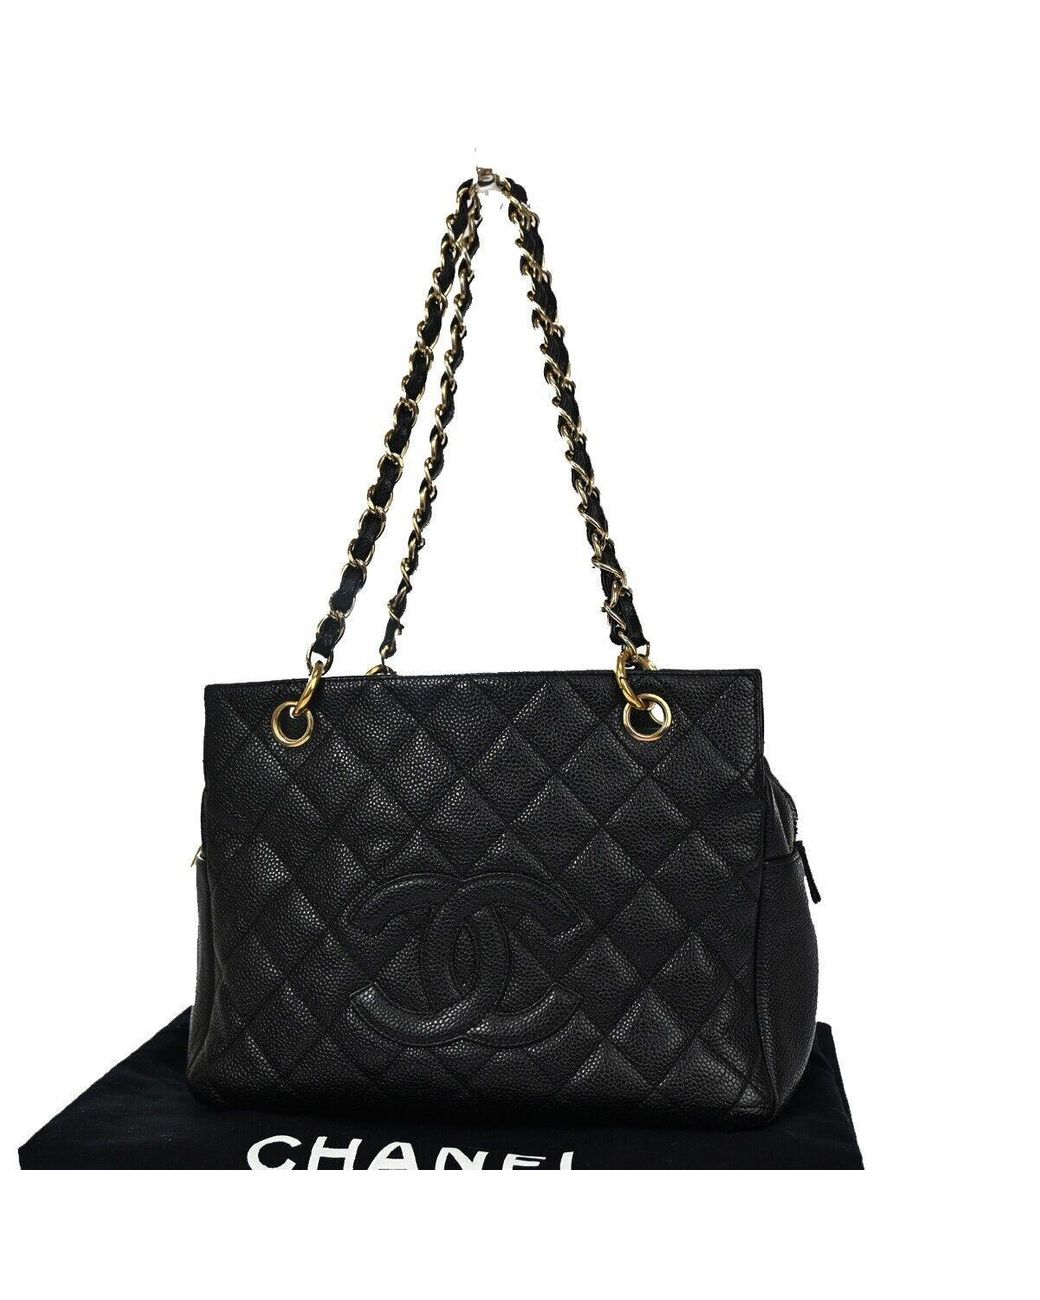 Used Chanel Shopping Black Leather Tote Bag Shw AUTHENTIC